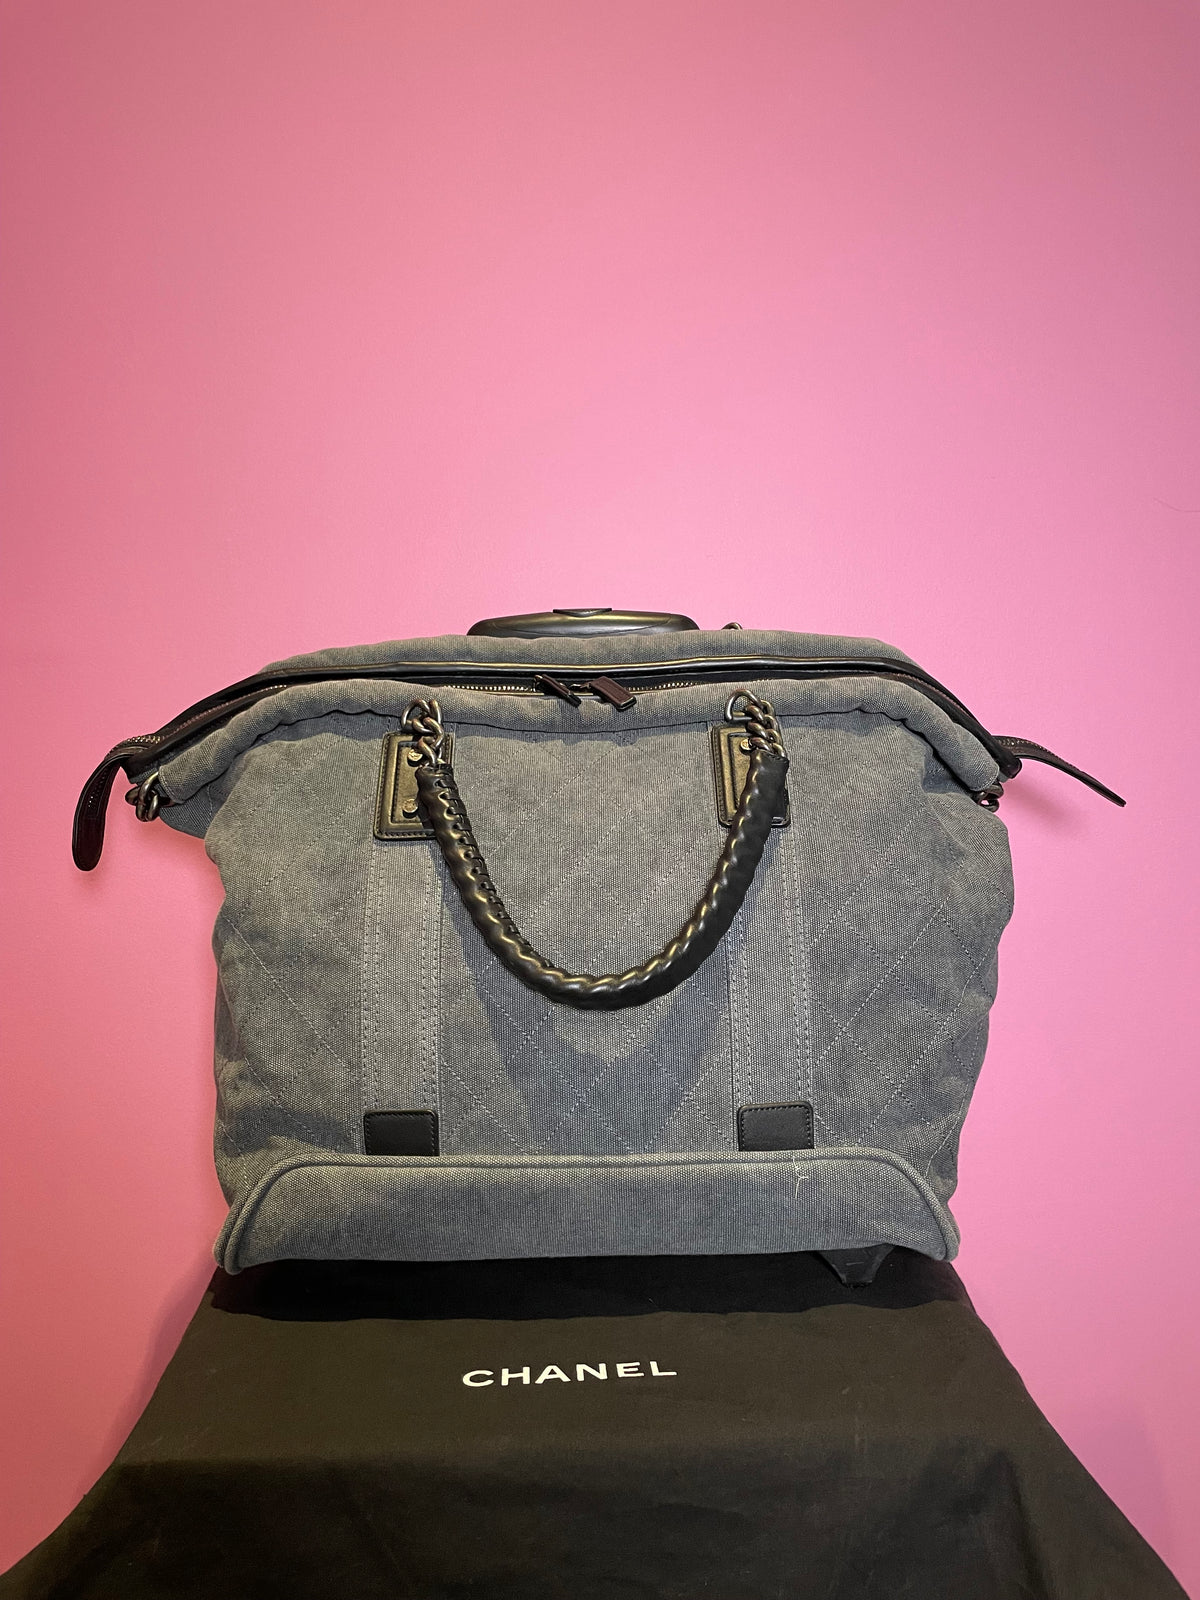 Shop CHANEL Luggage & Travel Bags